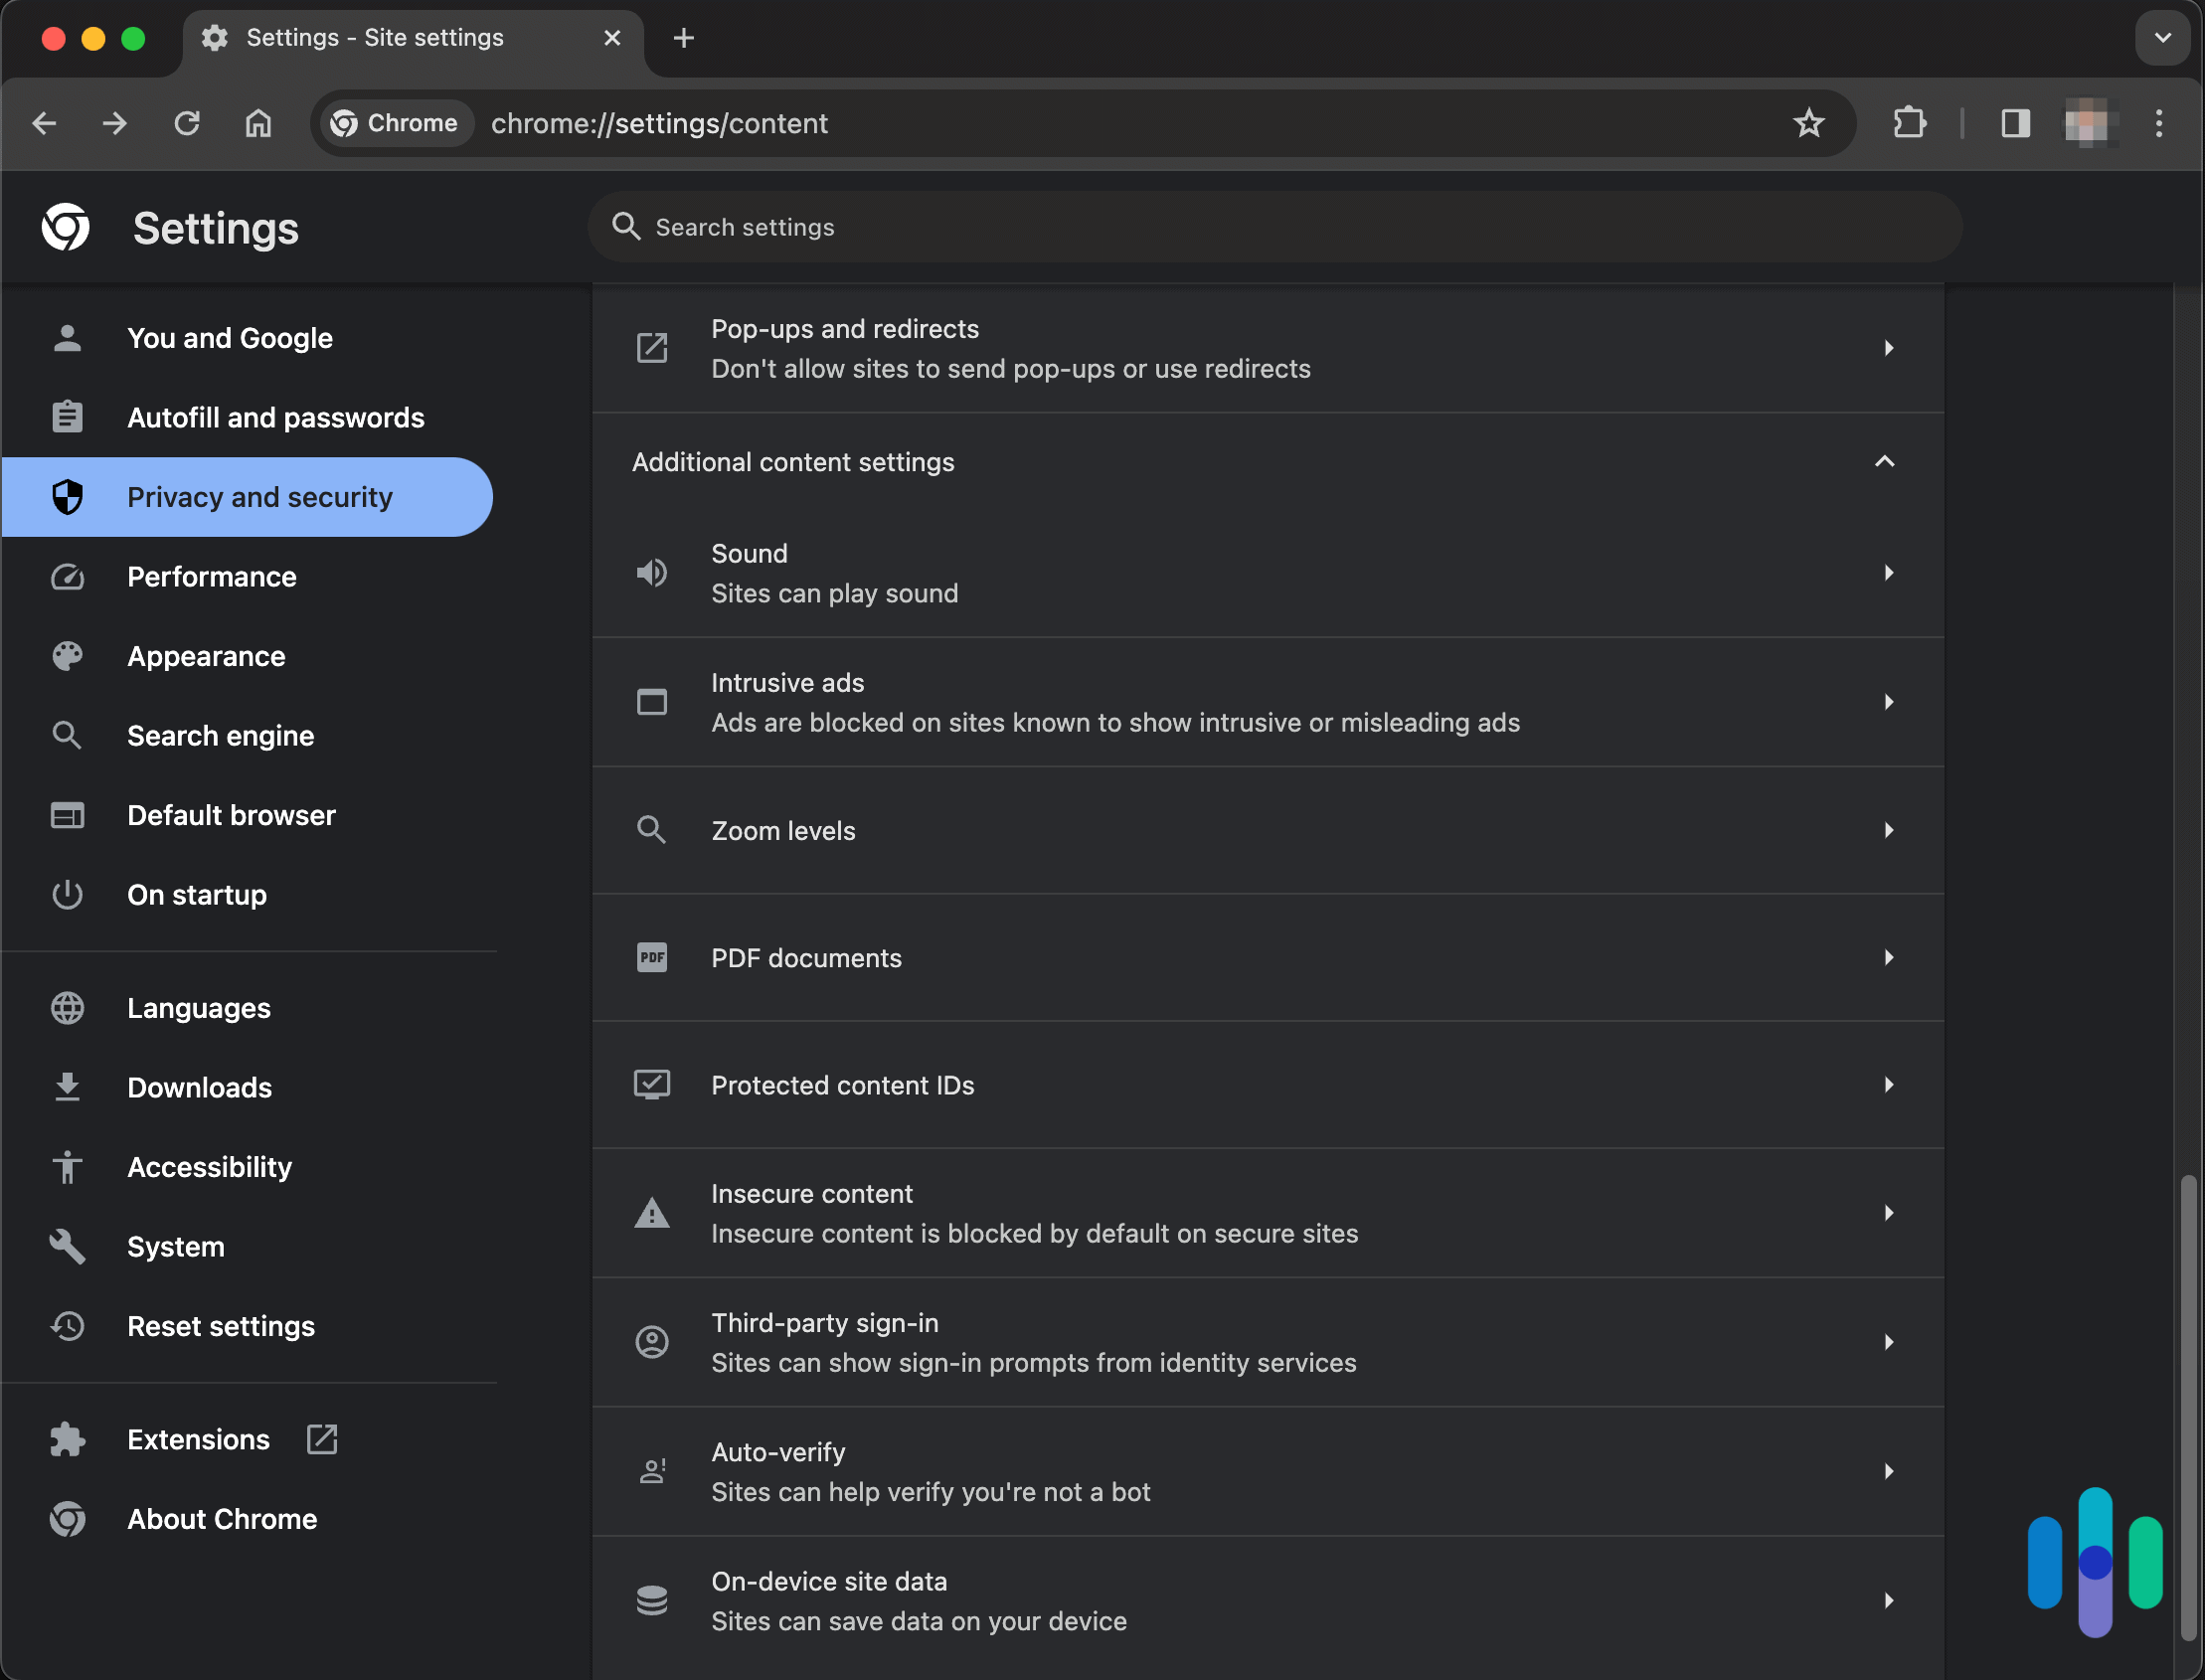 Site Setting Options in Chrome